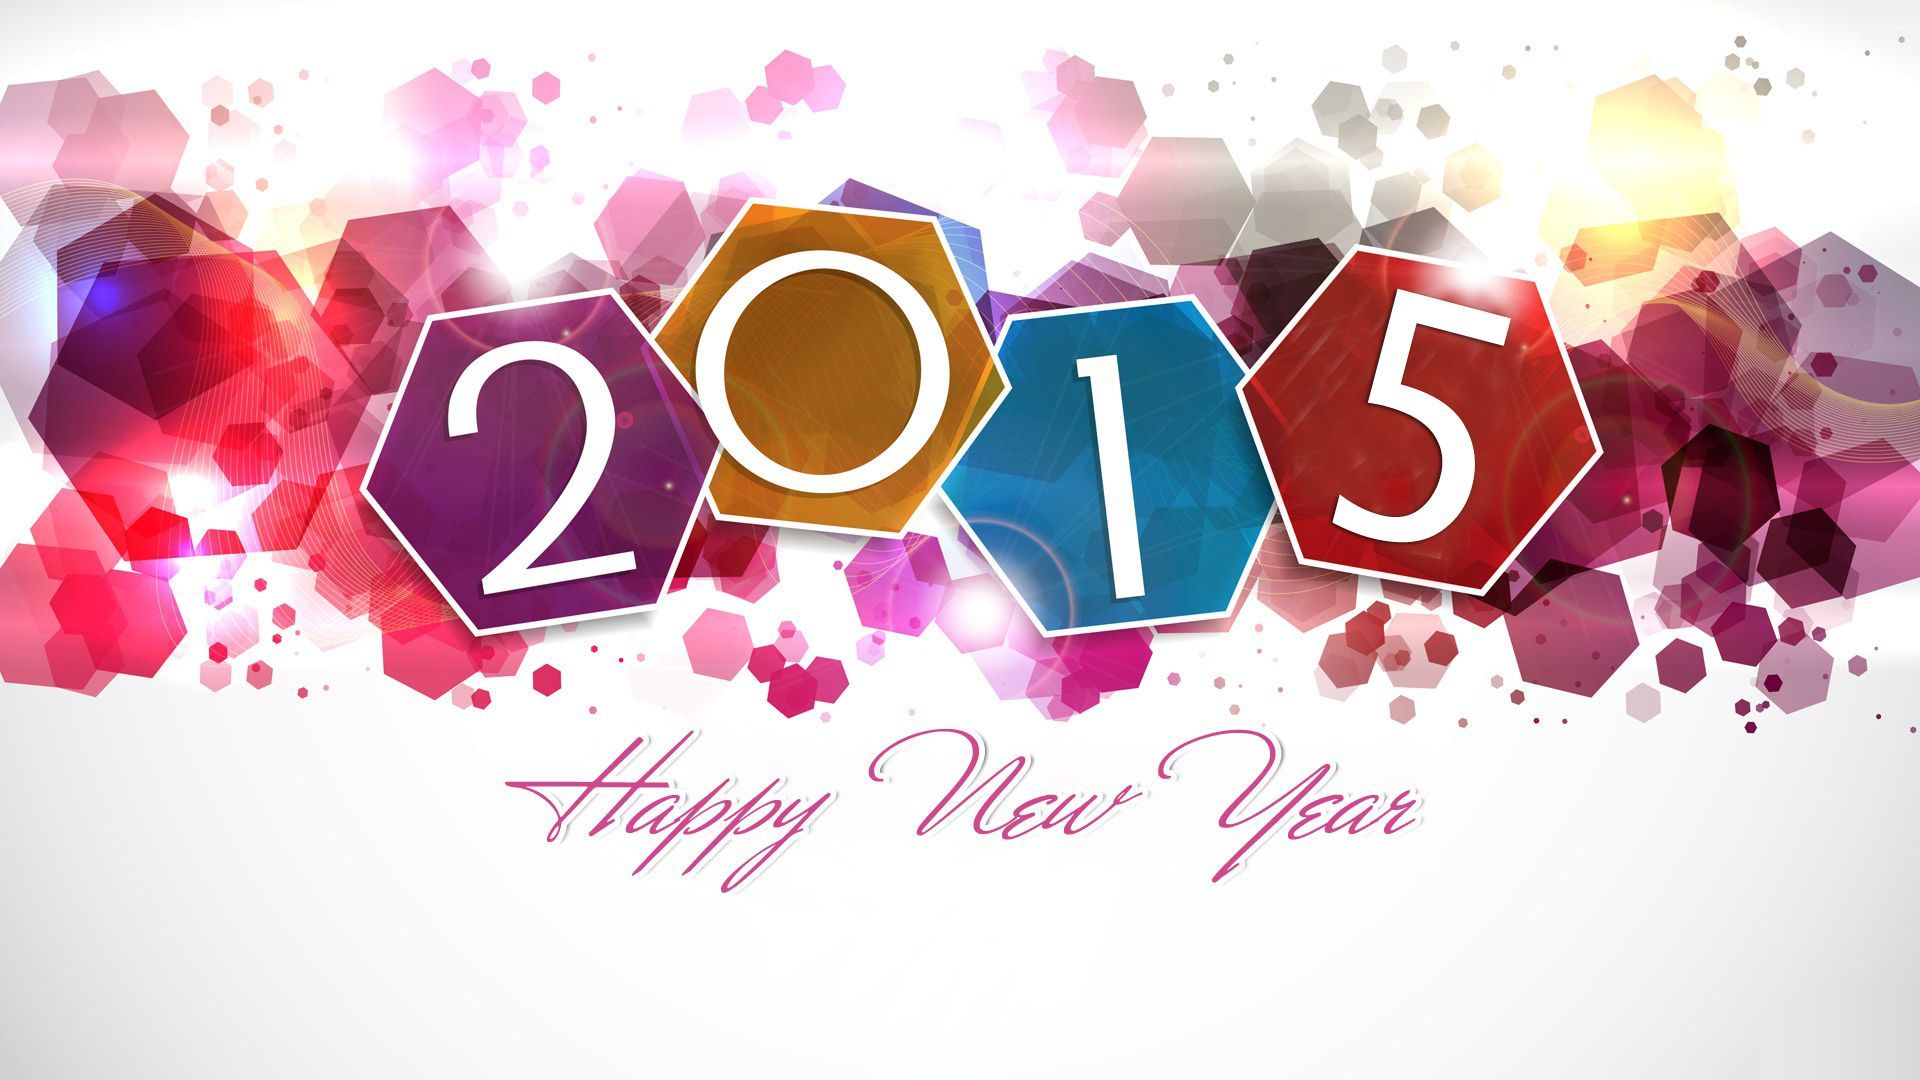 Best HD HAPPY NEW YEAR 2015 Wallpapers For Your Desktop PC.